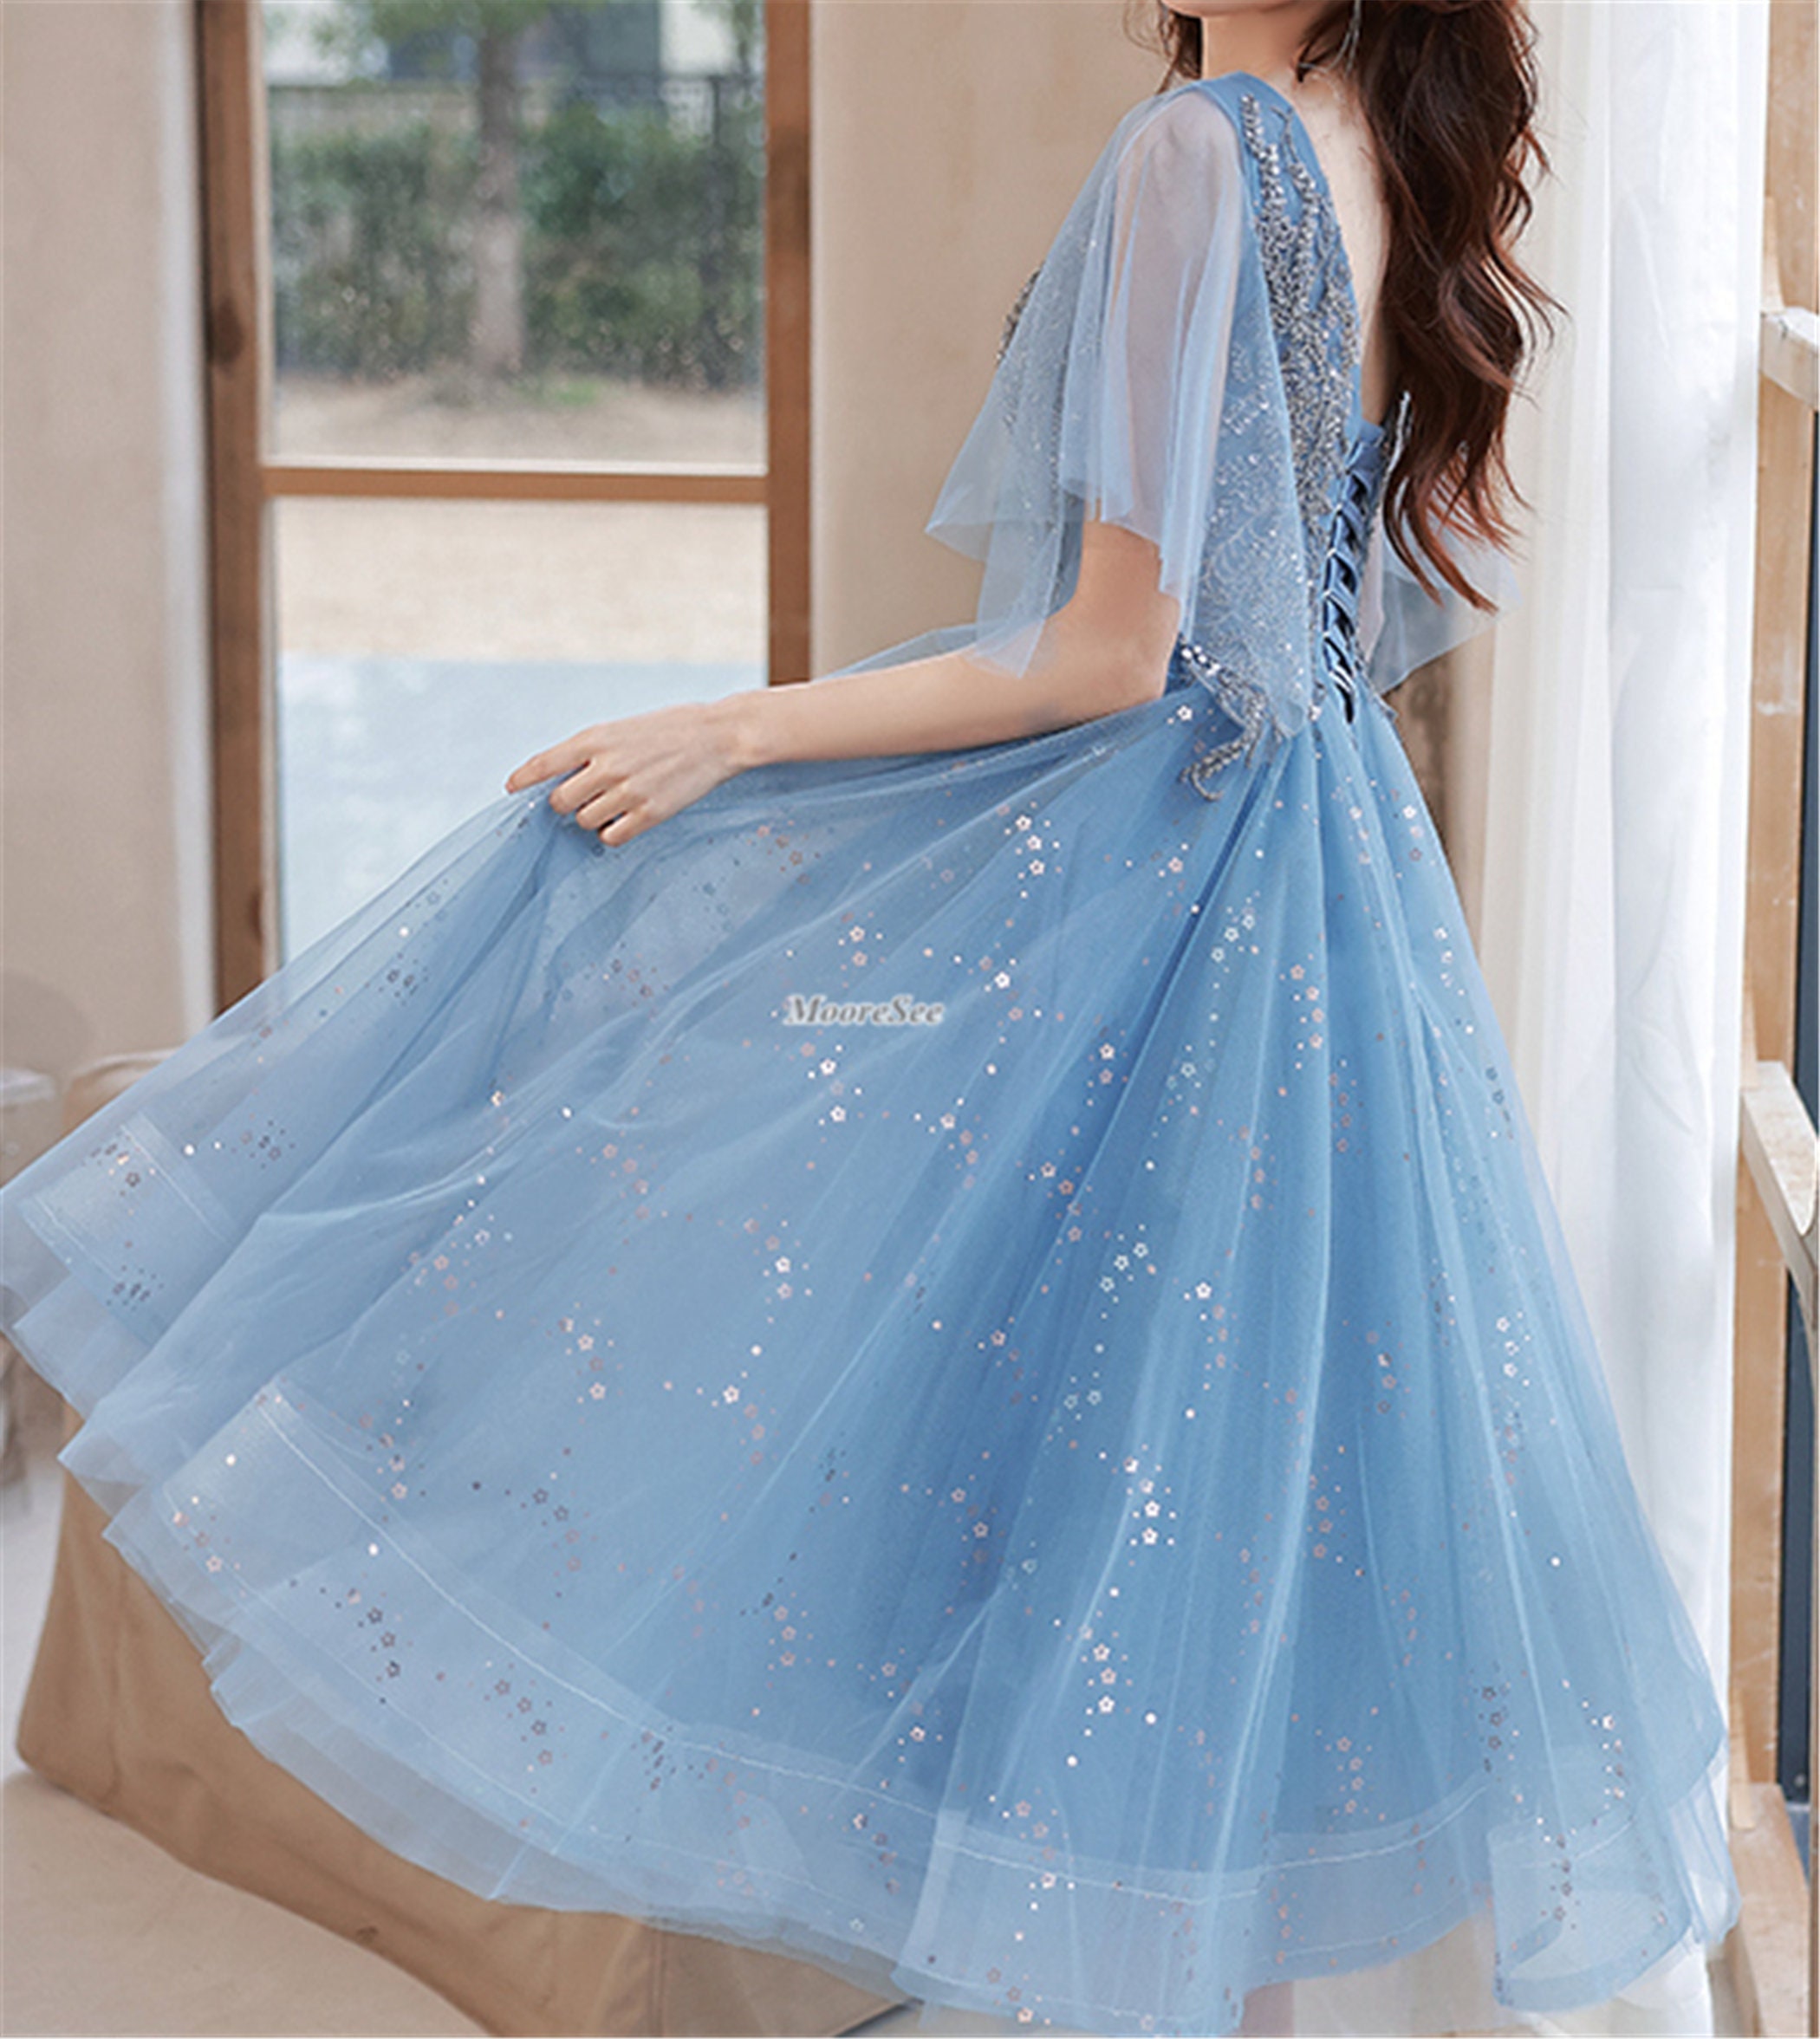 Viniodress Light Blue Boho Prom Dresses with Butterfly Appliques FD1637 Custom Colors / US 0